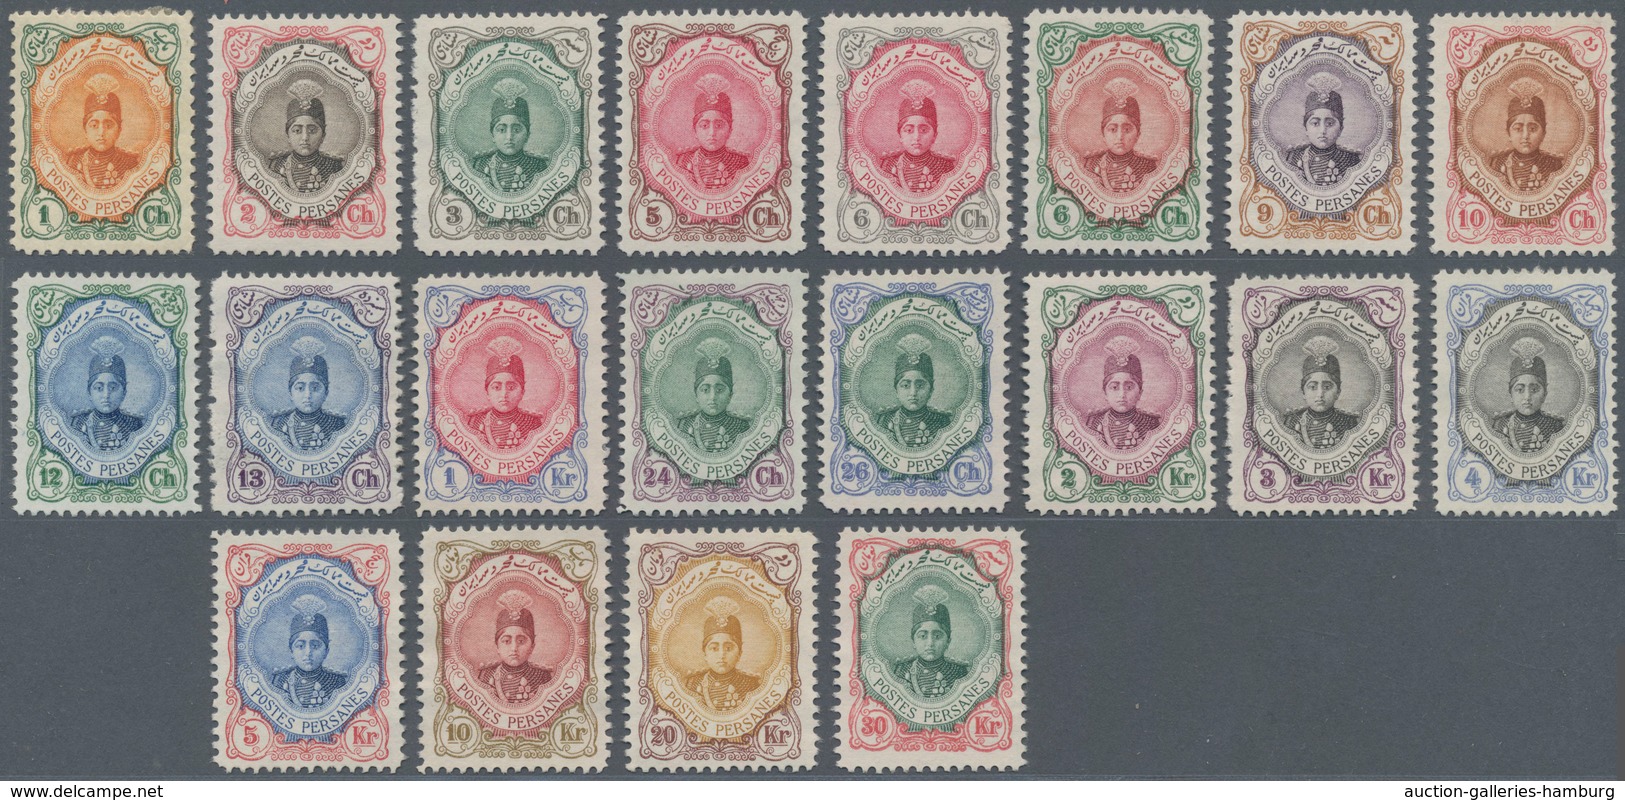 Iran: 1911/1913, Ahmad Shah Qajar, 1ch-30kr., Complete Set Of 20 Values, Fresh Colours And Well Perf - Iran